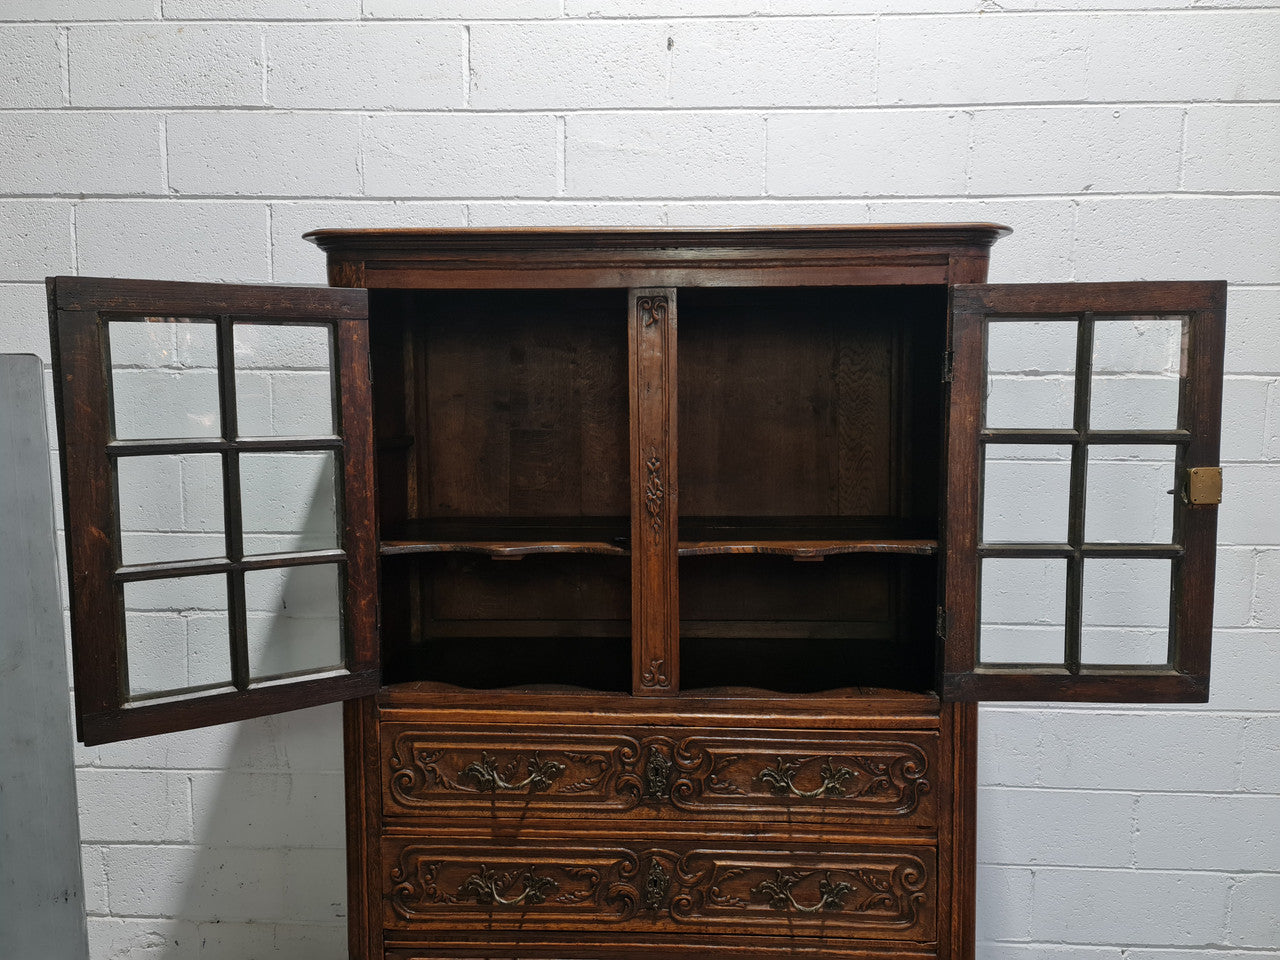 Rare French 18th Century Louis XVth style Oak linen press / display / cupboard. In very good original detailed condition.